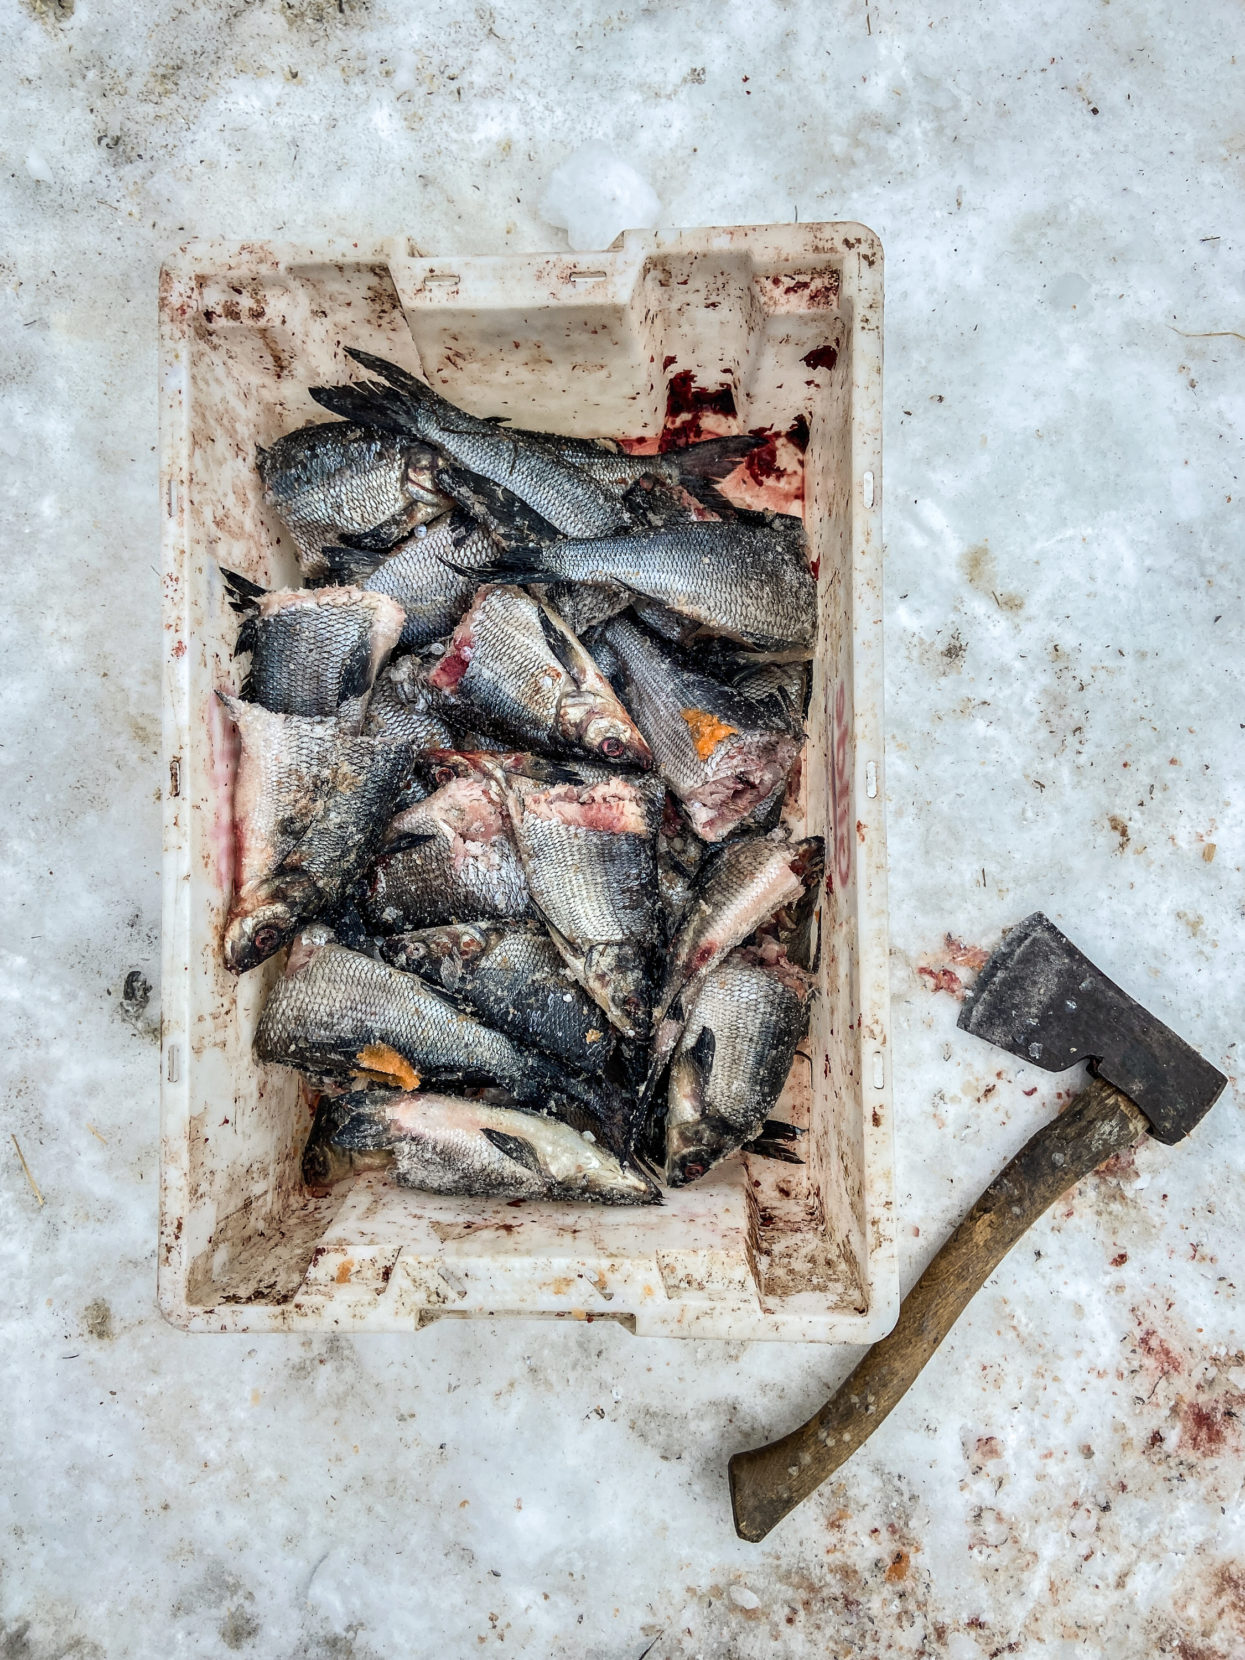 Sled dogs require plenty of fuel, but whether it’s a mealtime mix of meat and fish oil, or an aquatic snack of frozen fish, feeding the dogs can be a pungent experience. These fish were caught in the local river in the autumn and frozen for a winter treat. Photo: Edmée van Rijn.